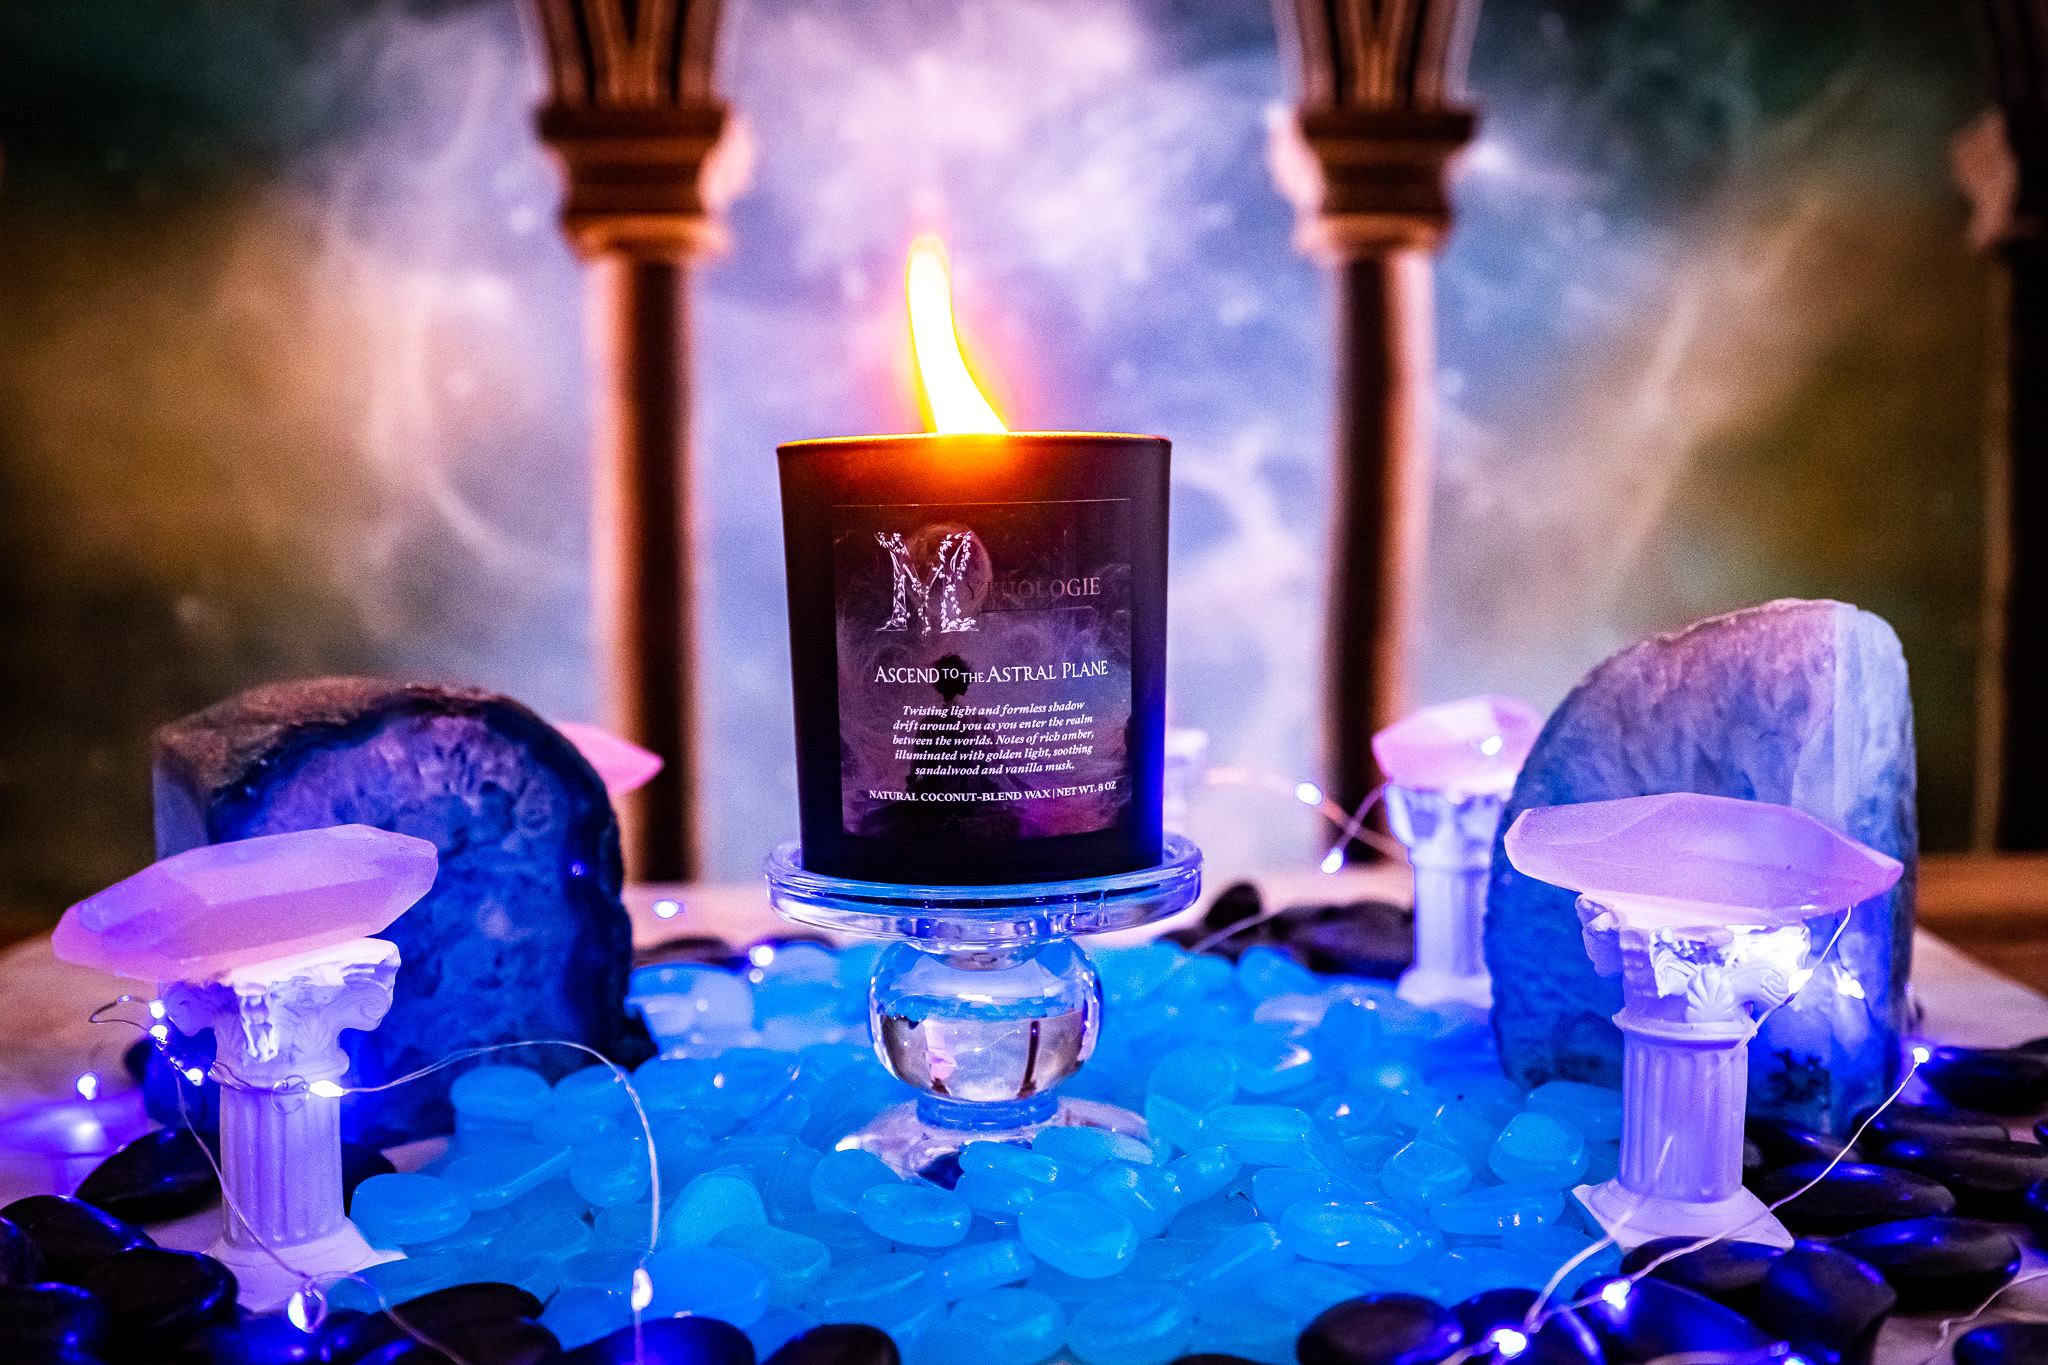 An ethereal, sweet aroma, reminiscent of toasted sugar, inviting you to indulge in its celestial essence.